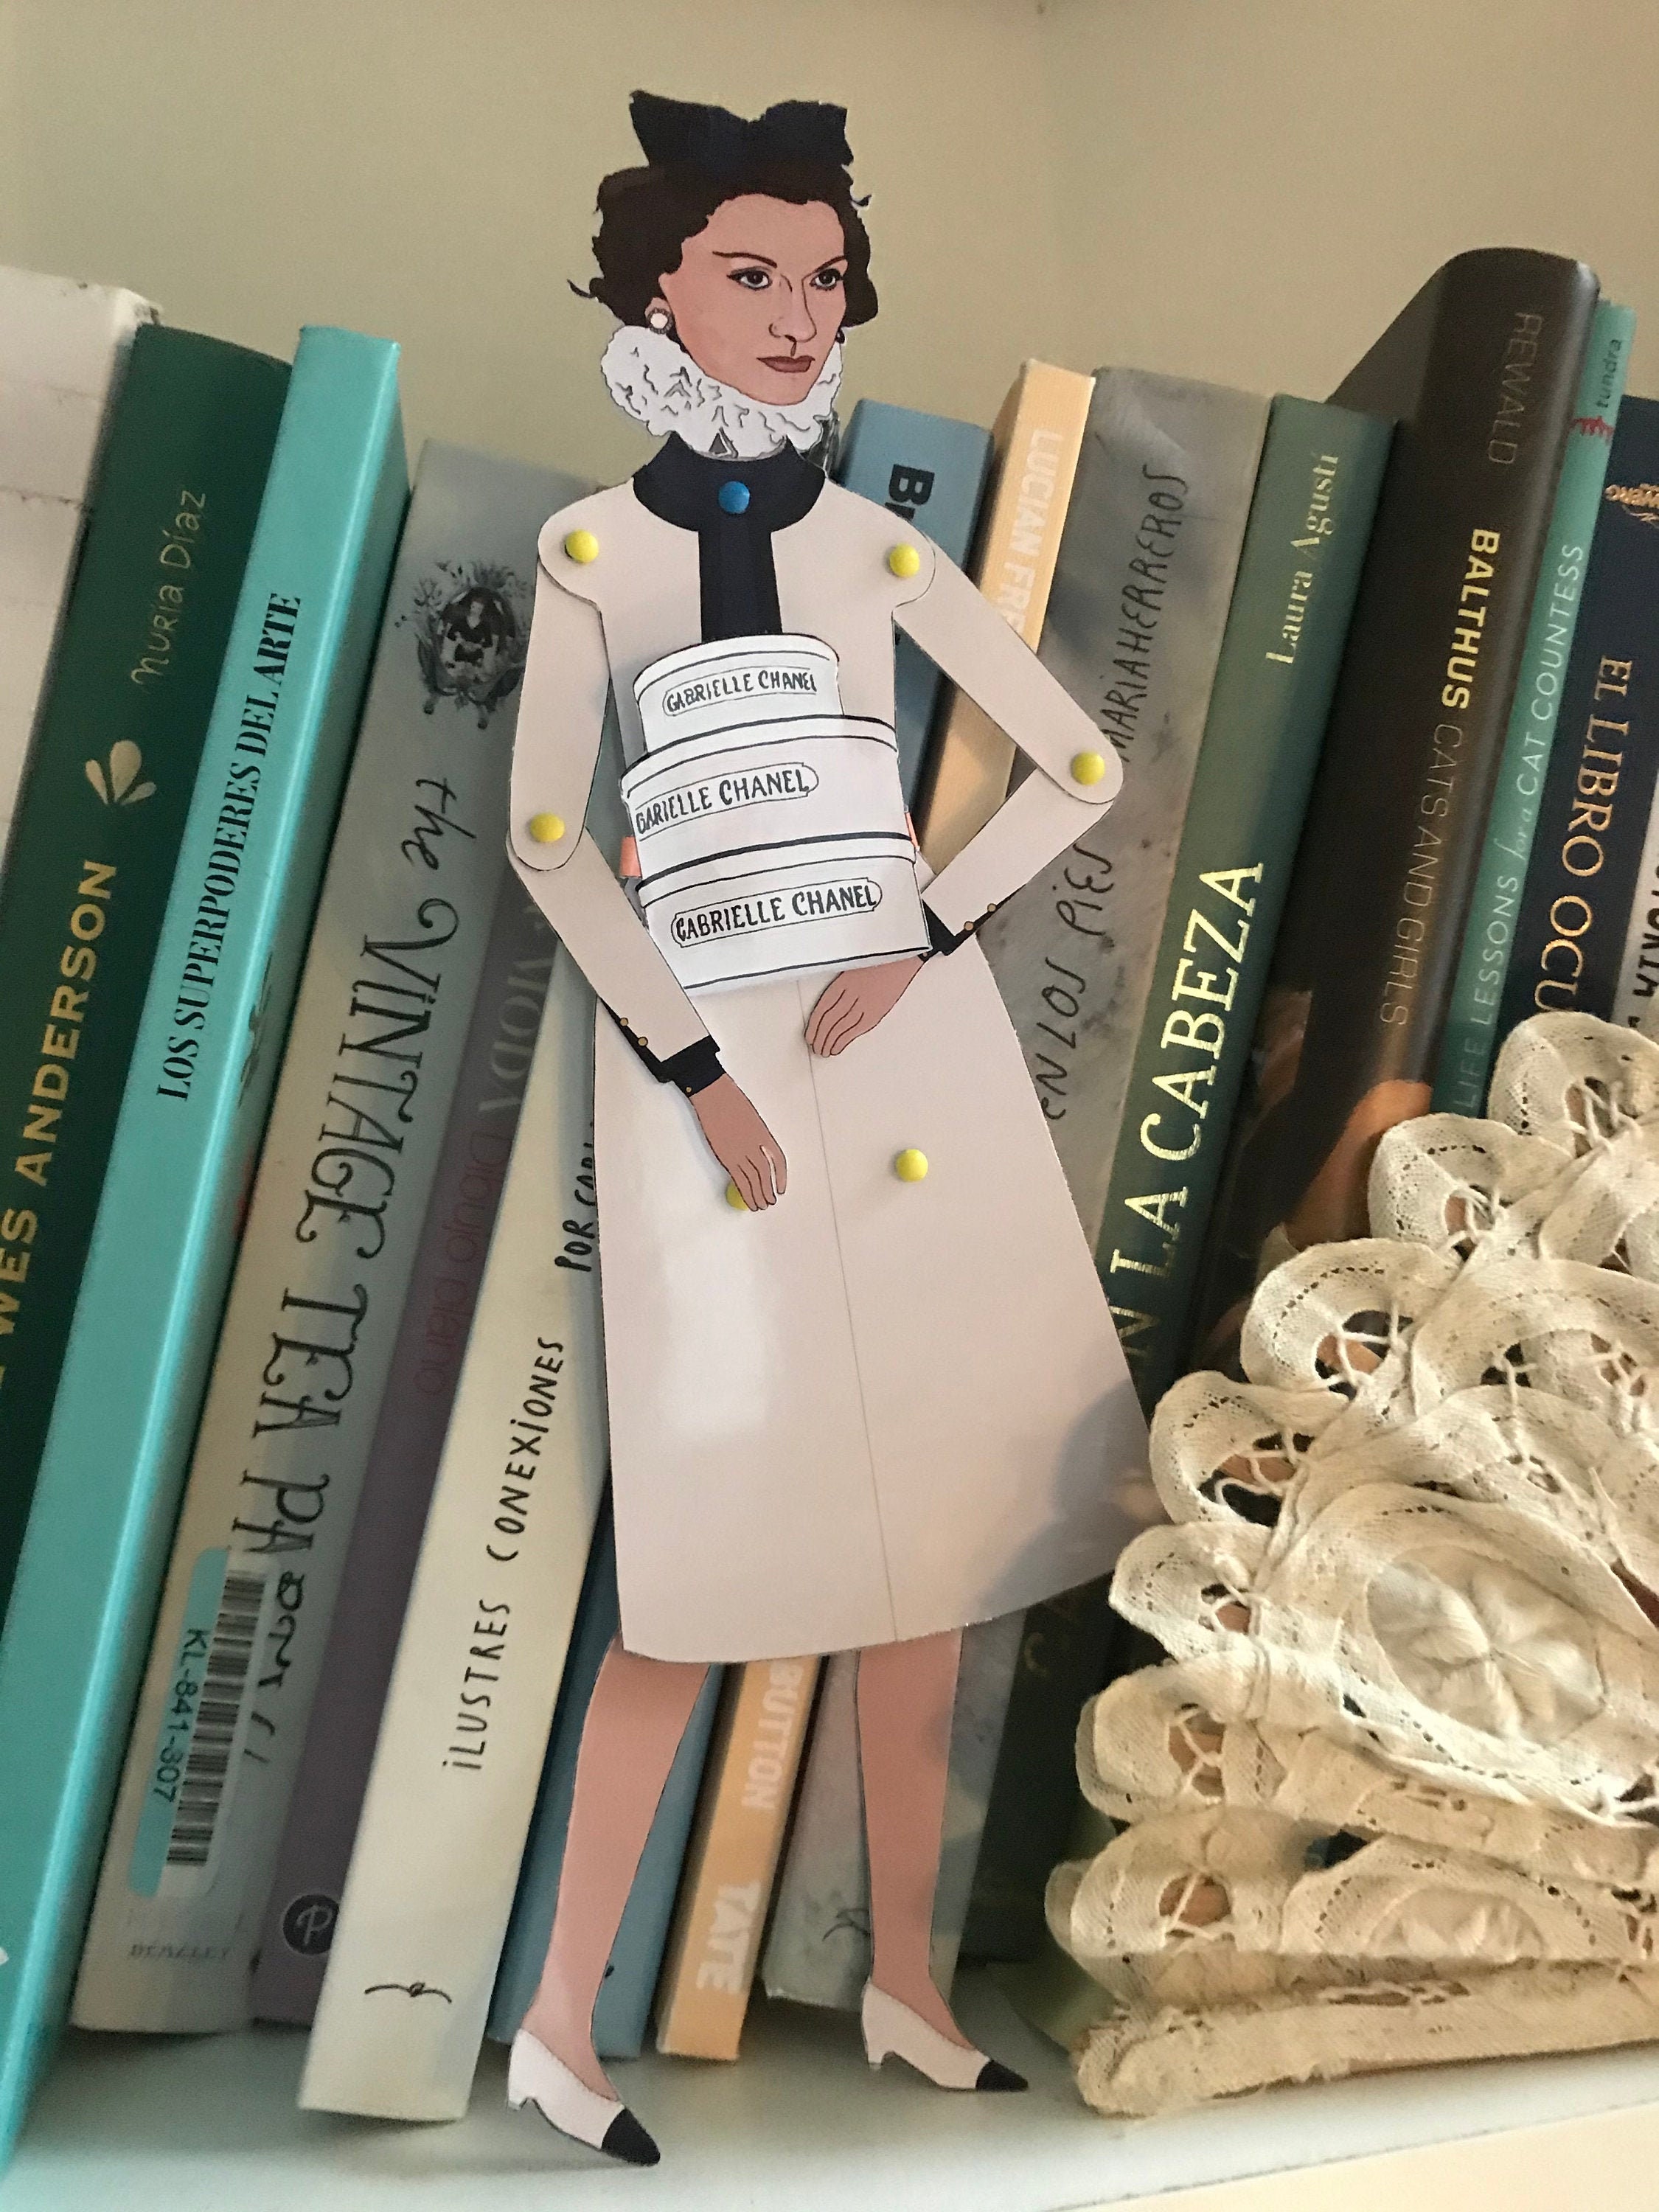 Coco Mademoiselle Chanel Doll Designed By Karl Lagerfeld 2010 For Sale at  1stDibs